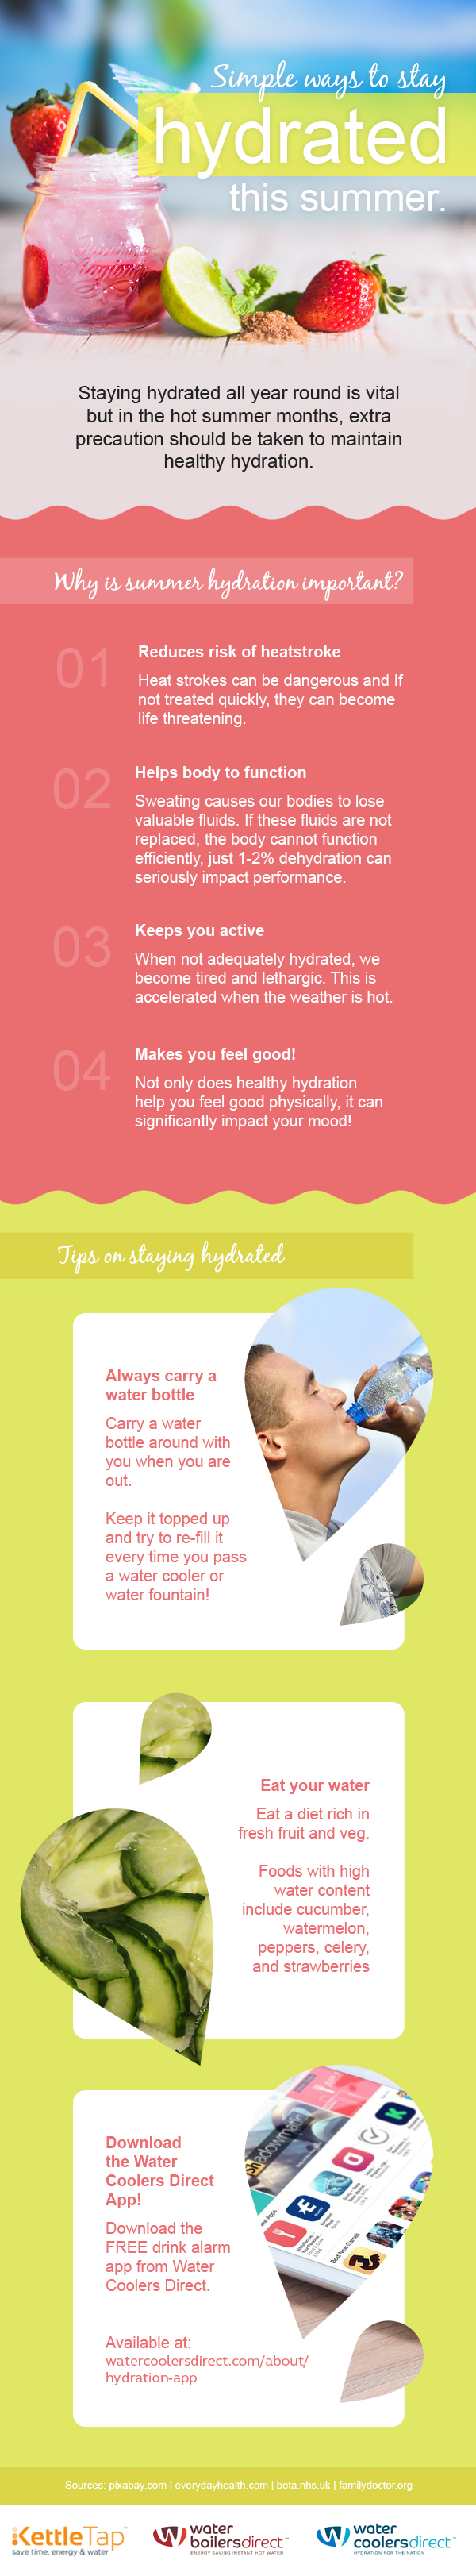 Simple ways to stay hydrated this summer